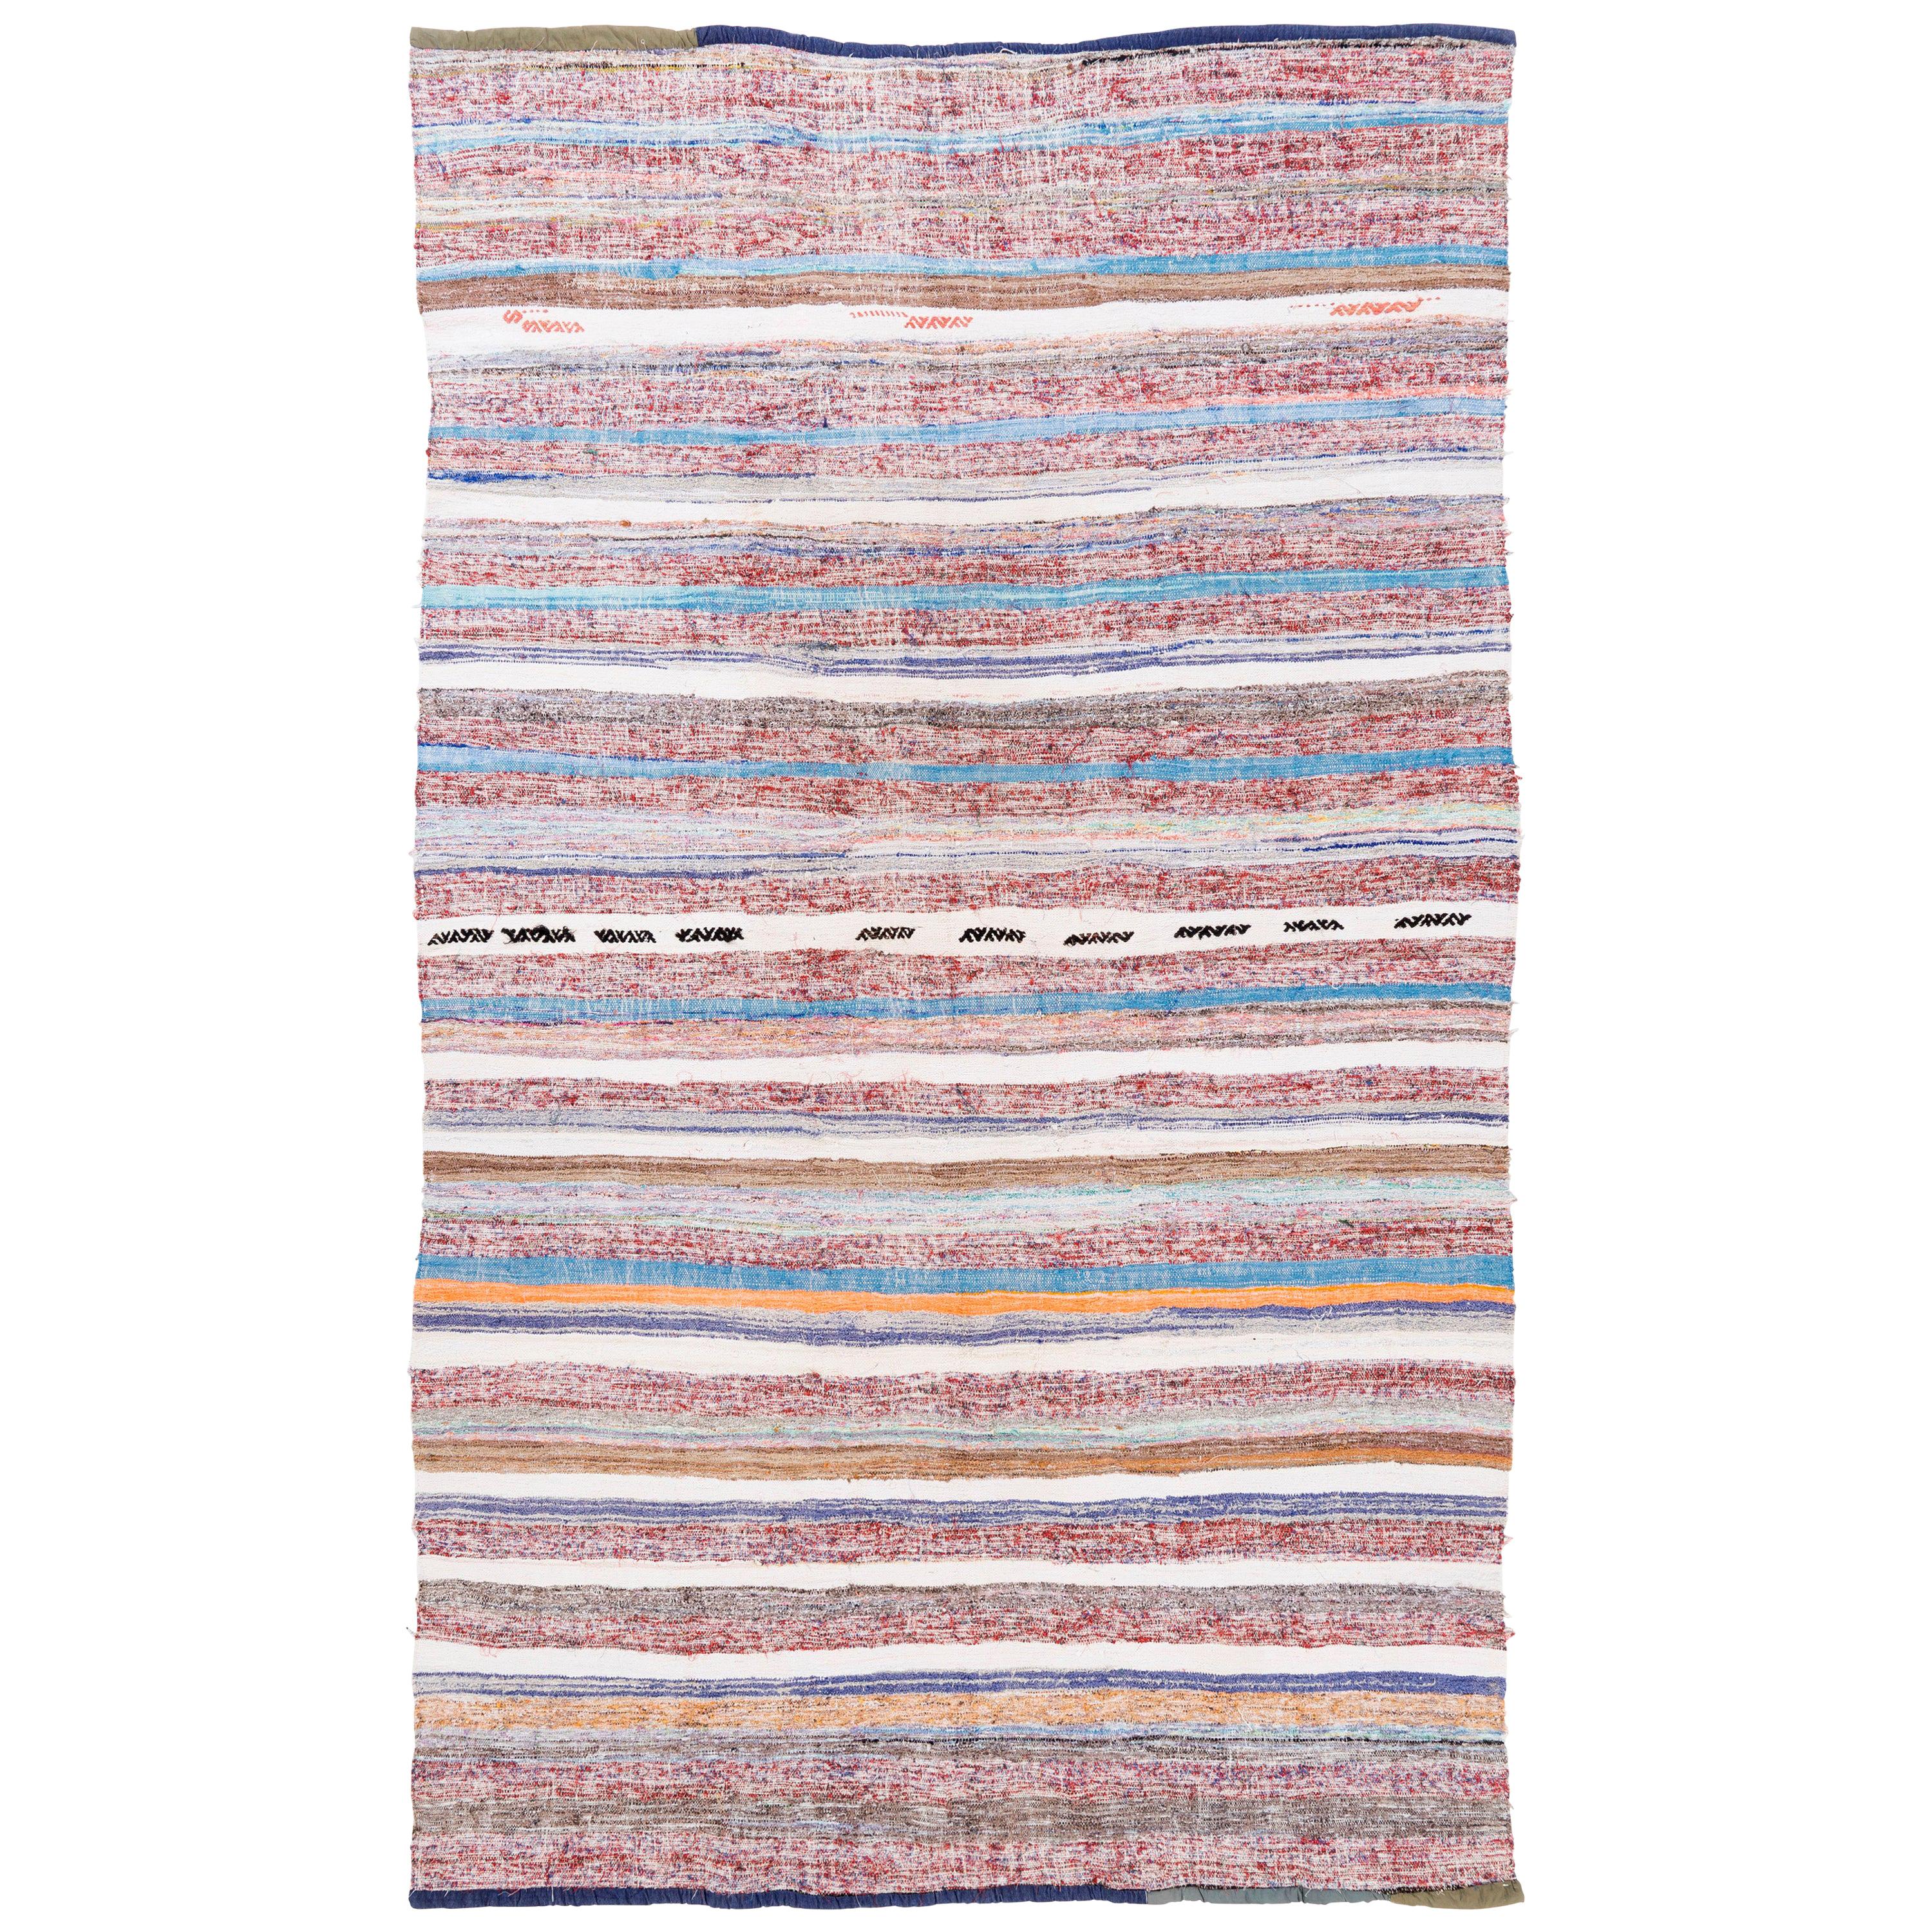 6.6x11 Ft Mid-century Handwoven Banded Kilim Rug, Flat-Woven Cotton Carpet For Sale